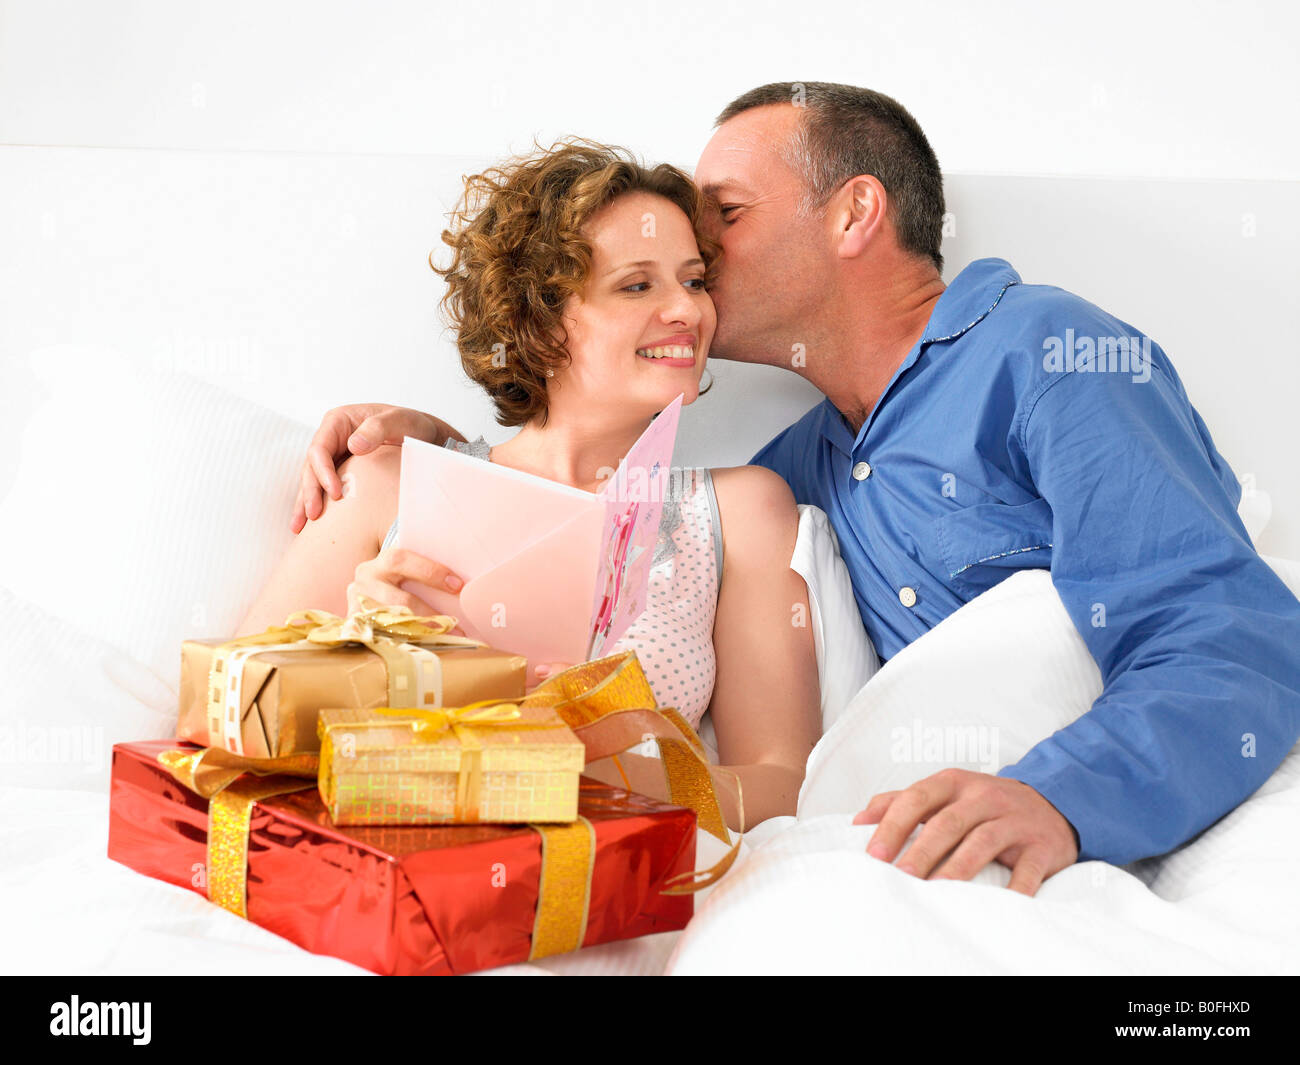 Man kissing woman in bed Banque D'Images